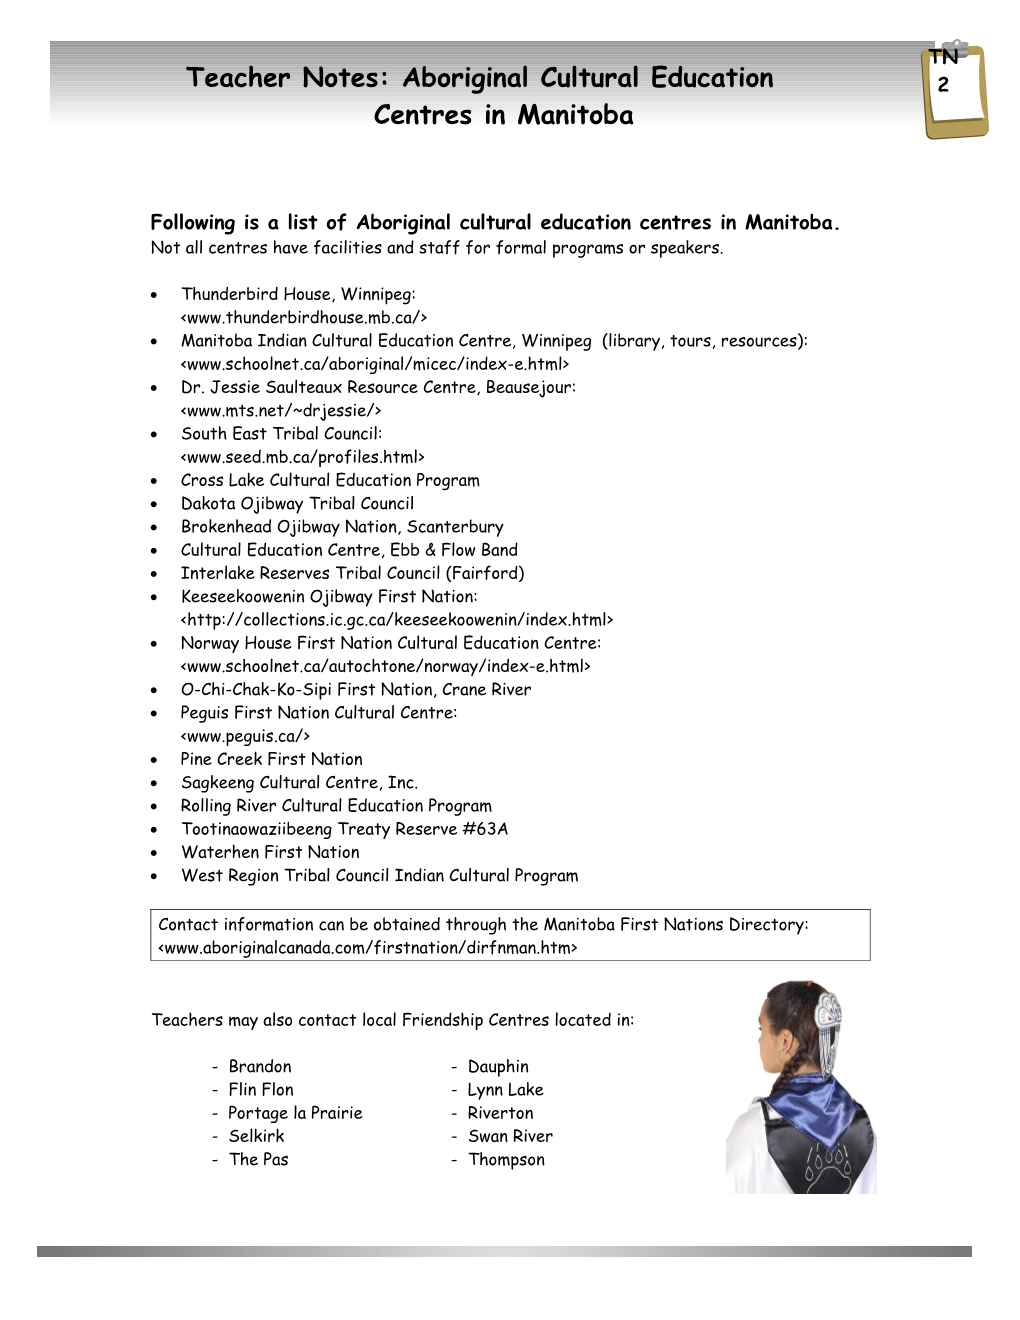 Following Is a List of Aboriginal Cultural Education Centres in Manitoba